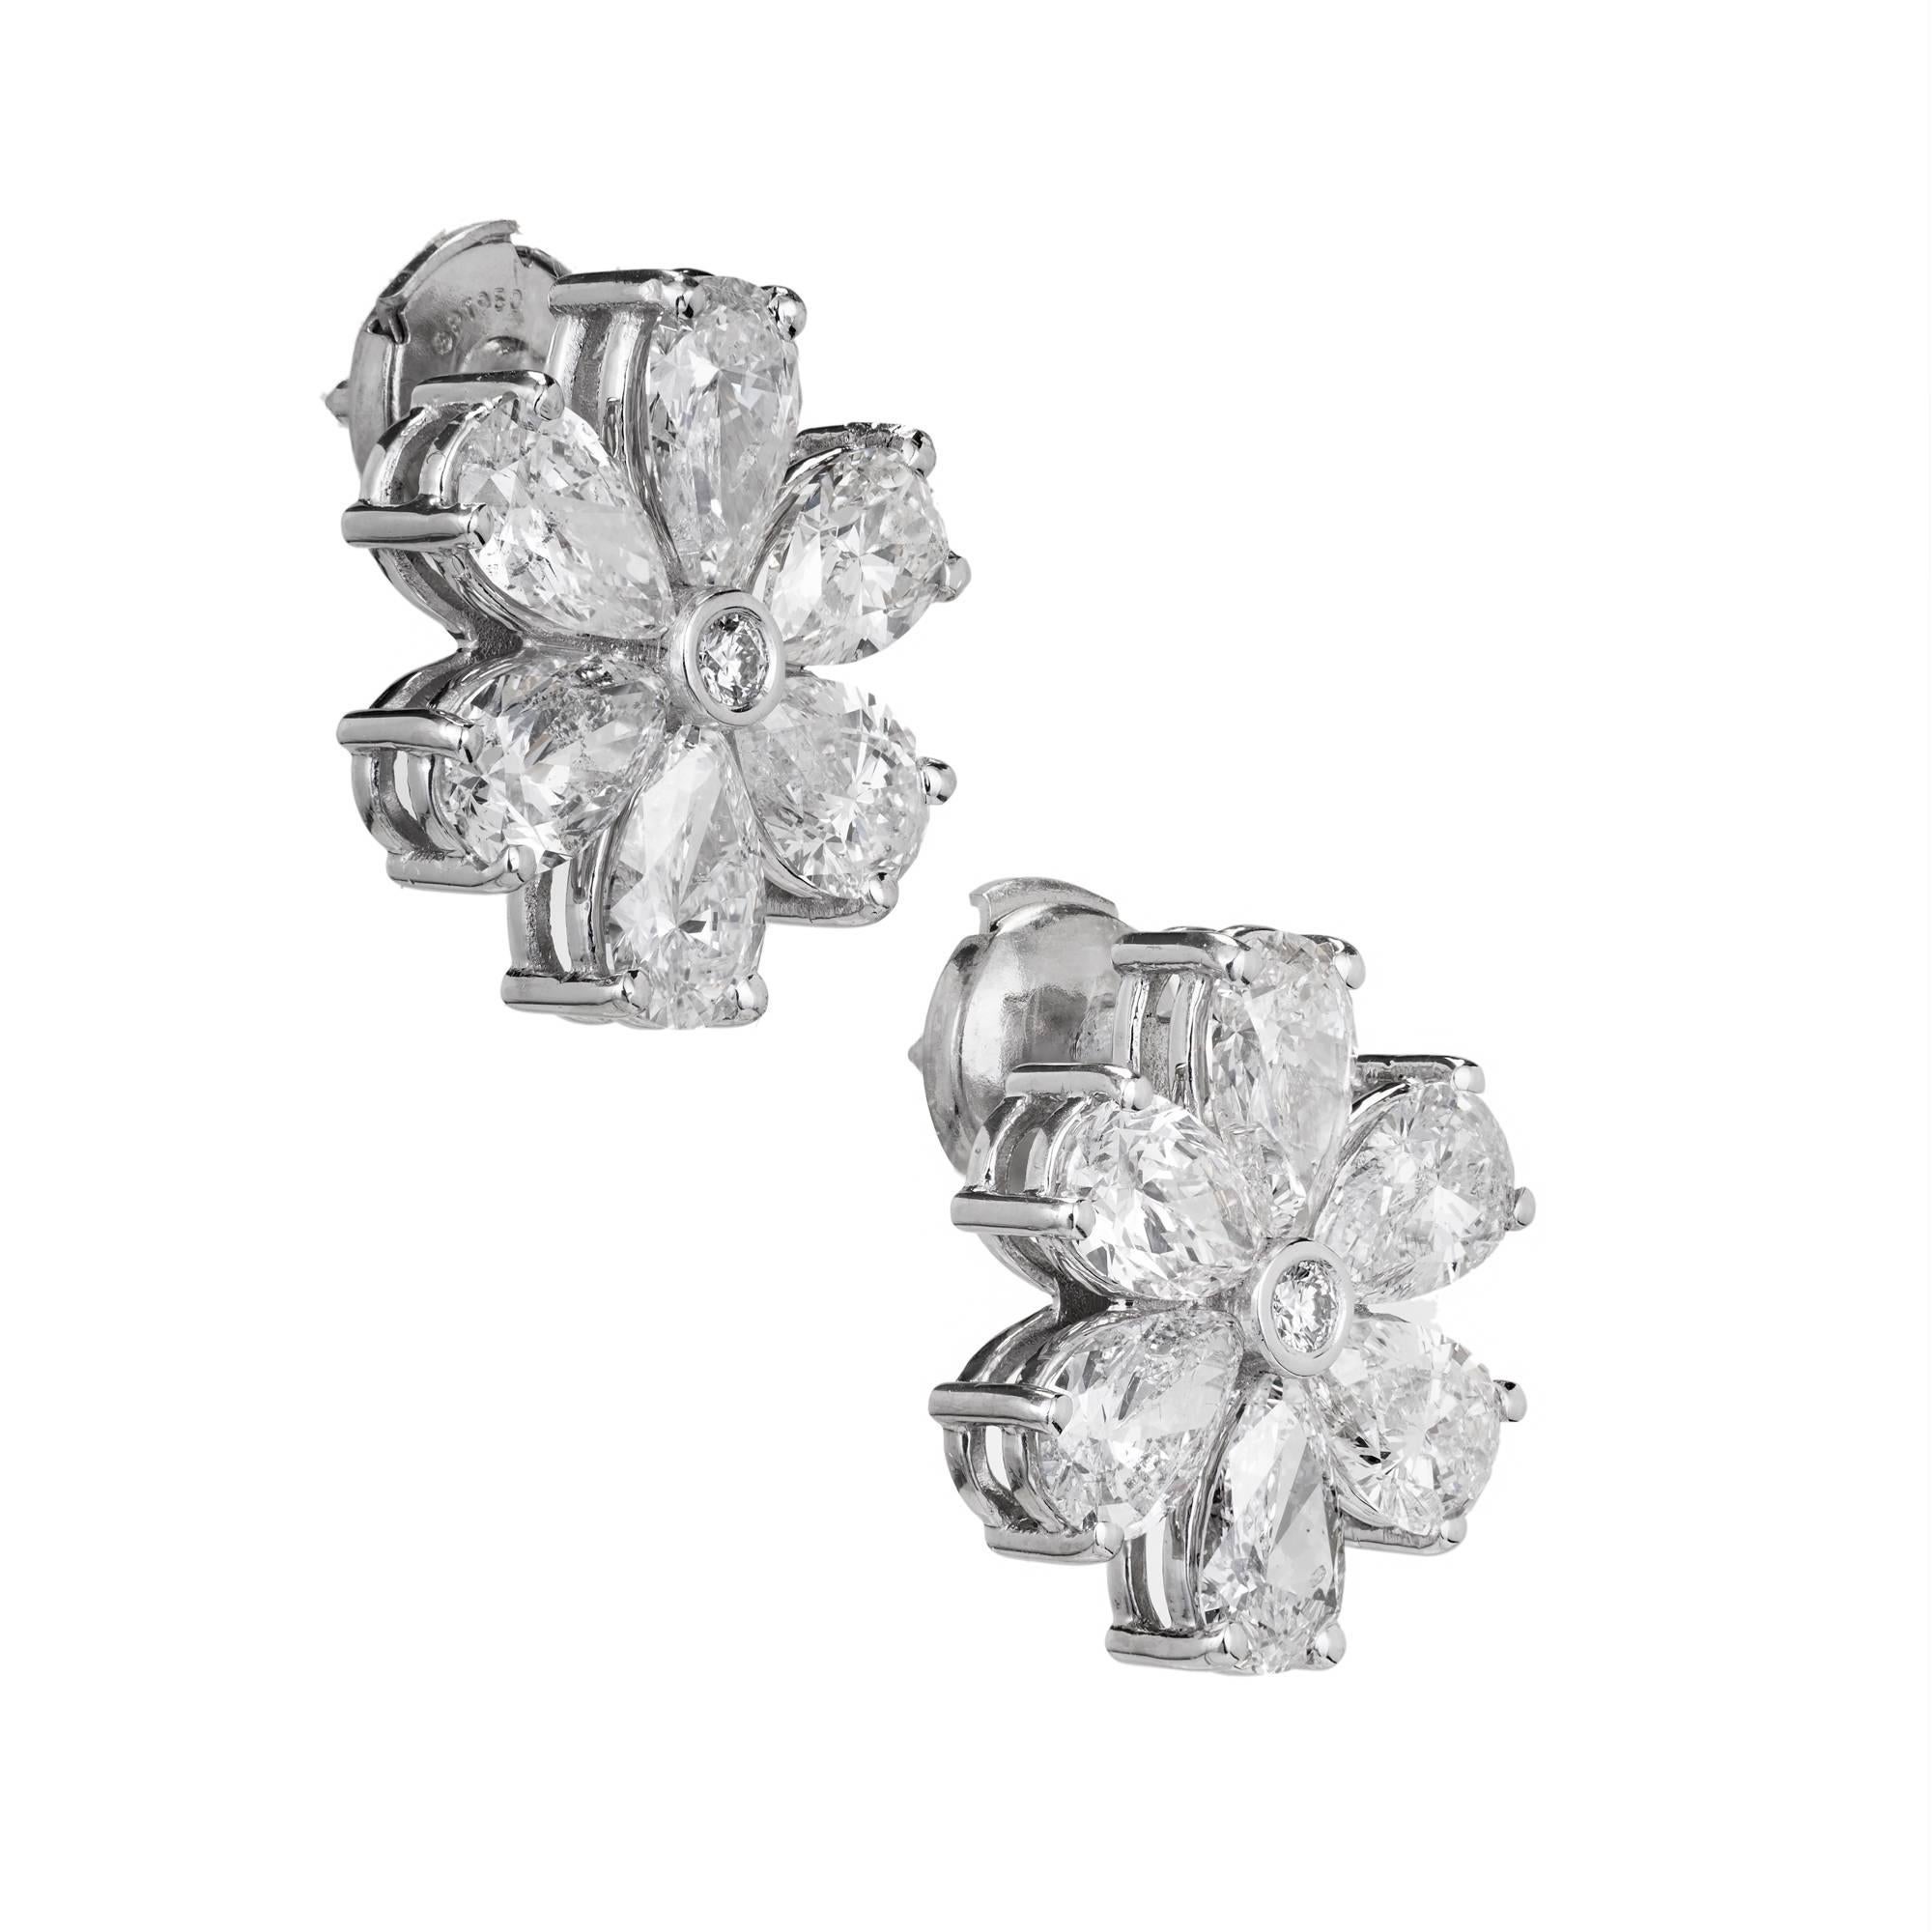 Peter Suchy Jewelers pear shaped Diamond cluster earrings in handmade Platinum settings. Platinum posts and La Pousette safety backs.

2 round Diamonds, approx. total weight .04cts
12 pear Diamonds, approx. total weight 6.70cts, H – I, SI1 – I1
950